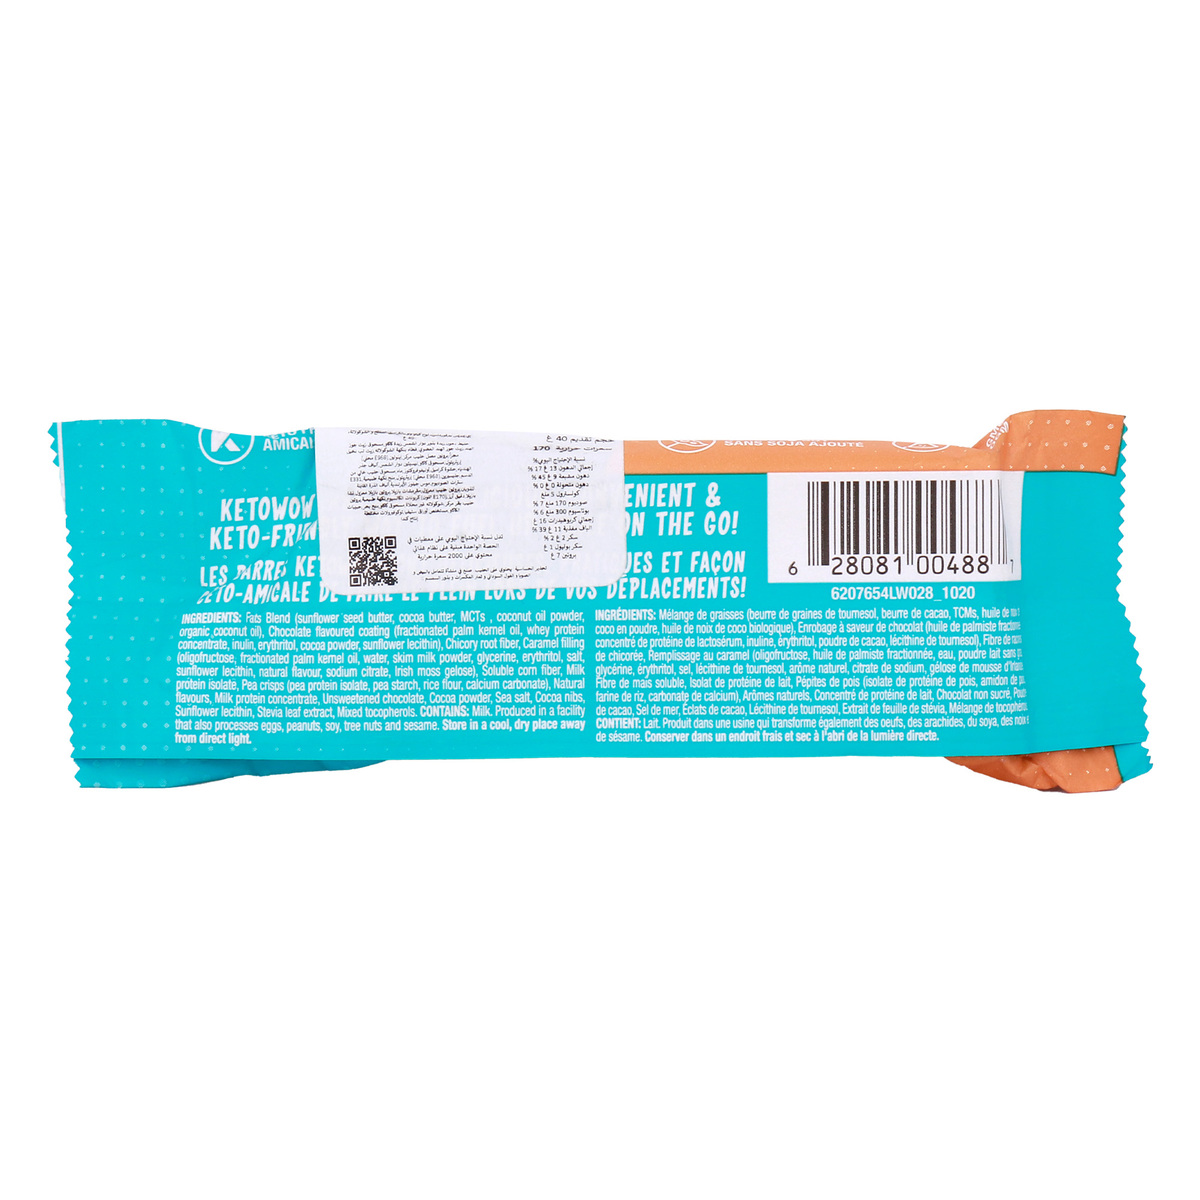 Ans Performance Keto Salted Caramel Chocolate Protein Bar 40g